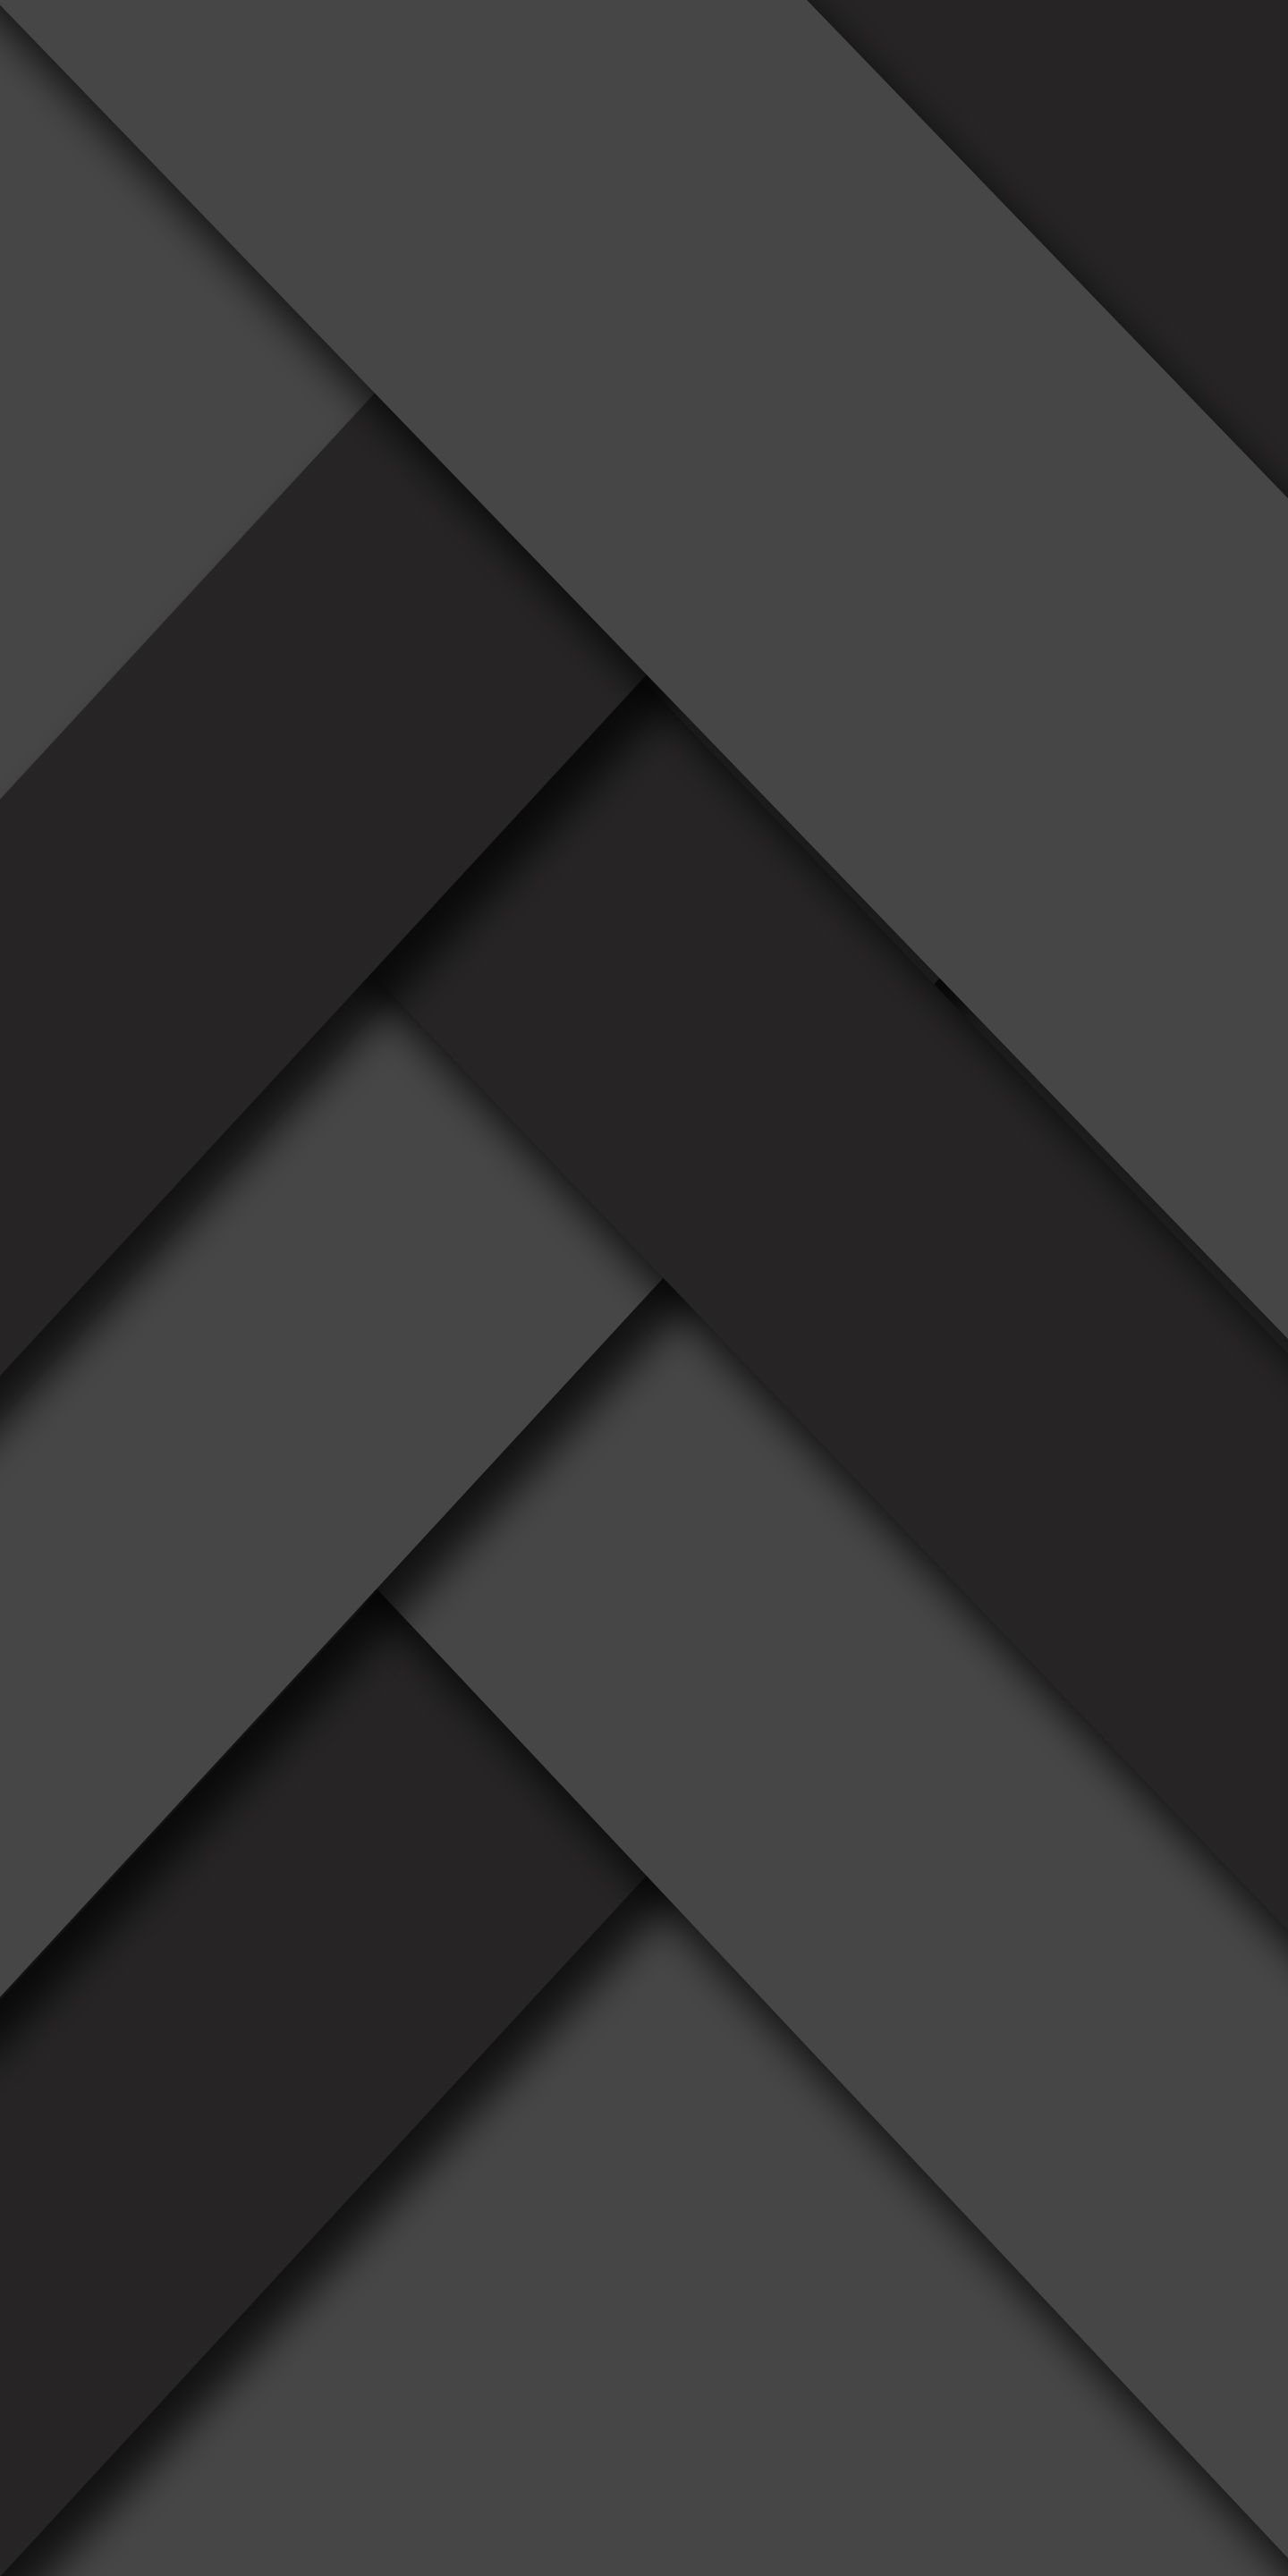 Material design black white, 18:9 wallpaper made by me. Material